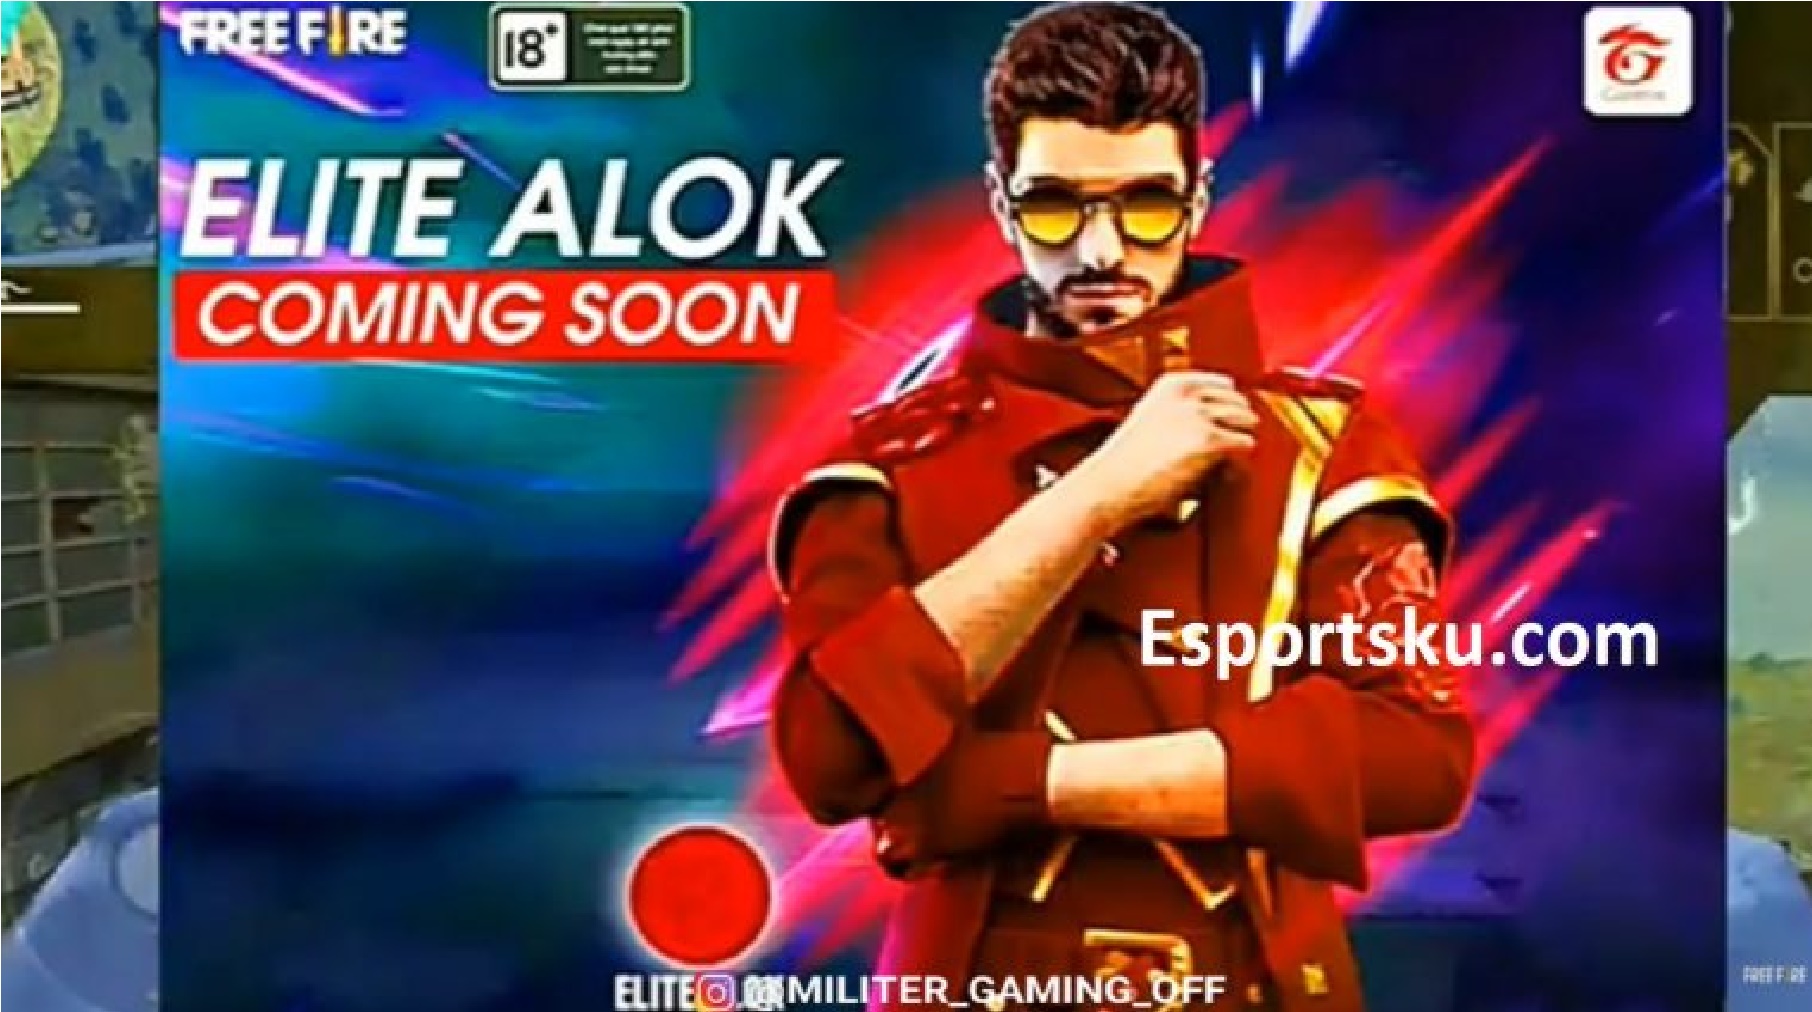 This Is The Alok Elite Bundle In Free Fire FF Looks Like Esports